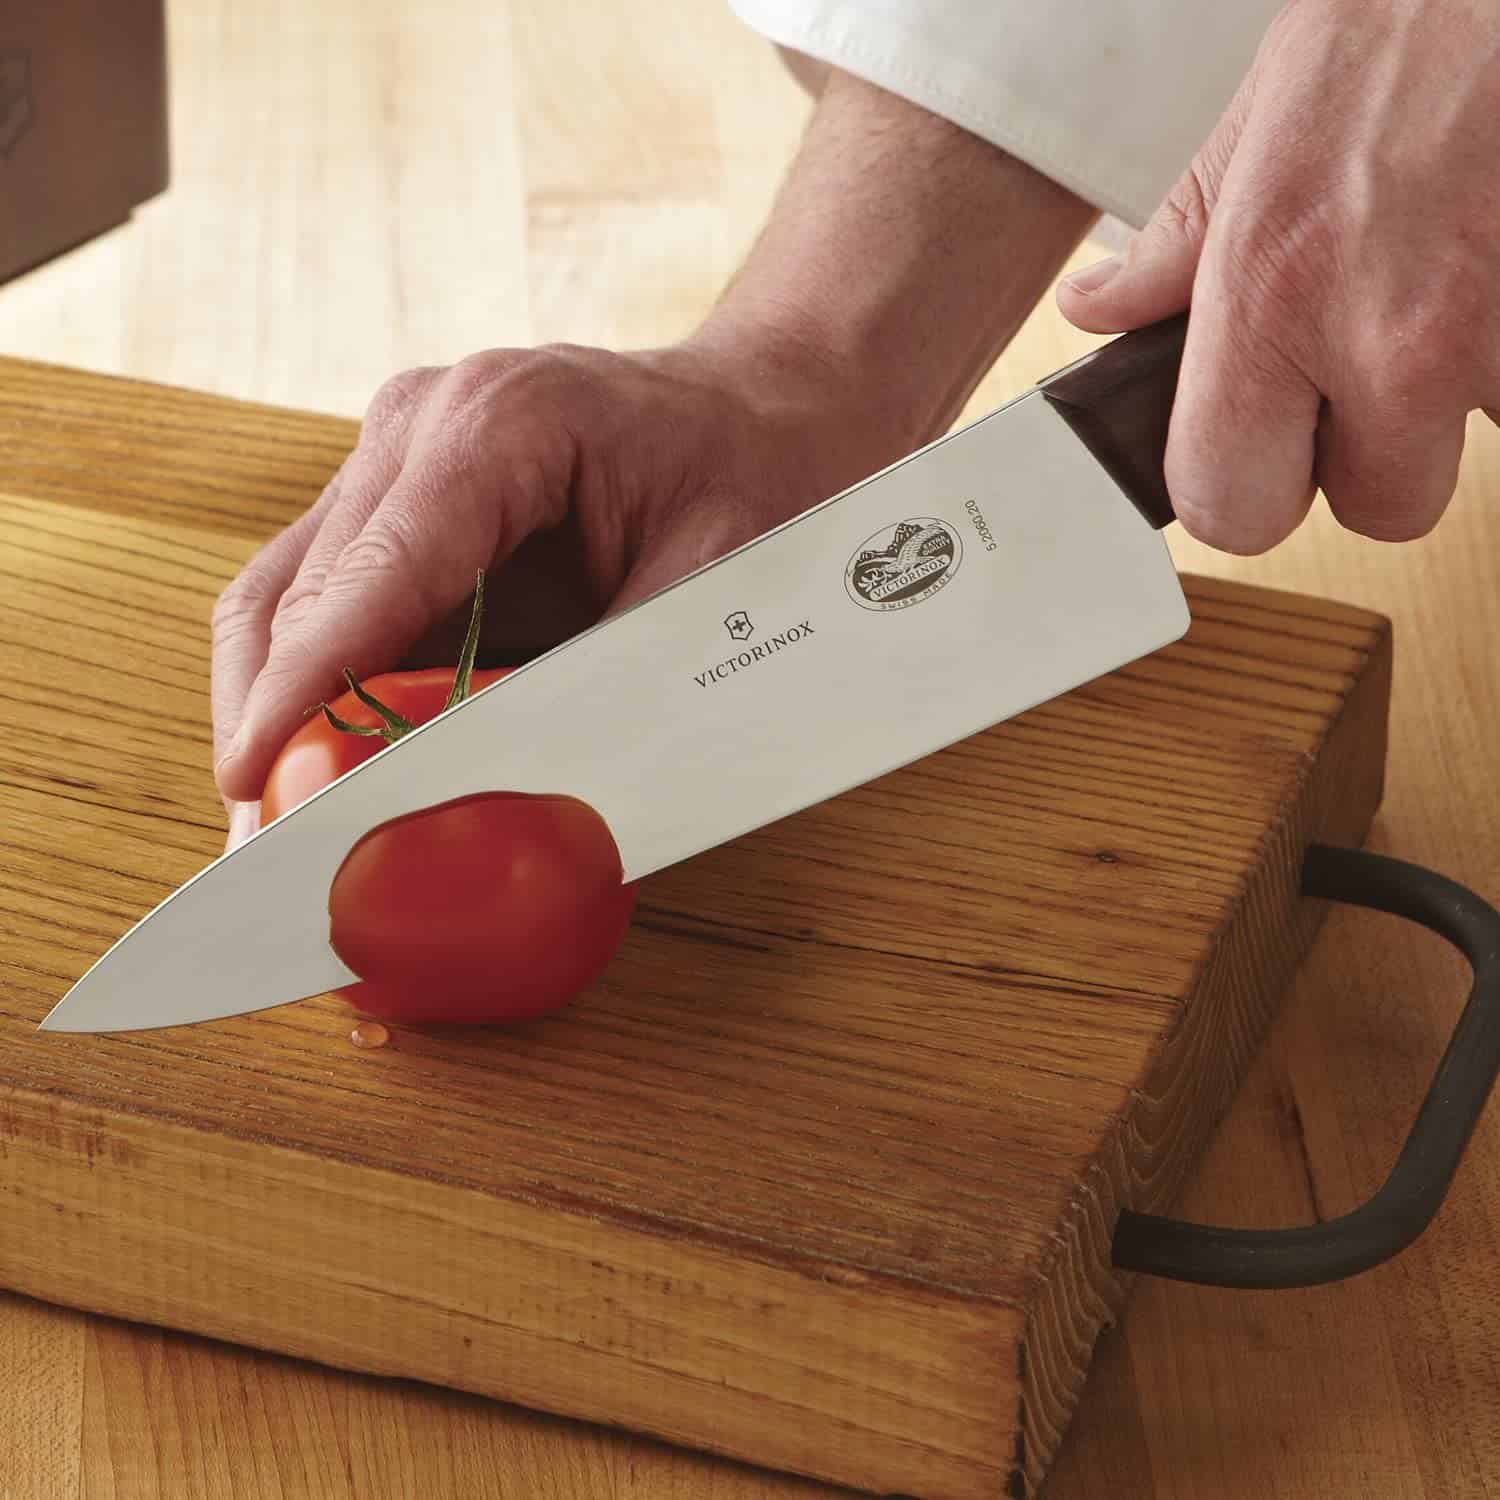 Rosewood Forged 8-inch Chef’s Knife Review